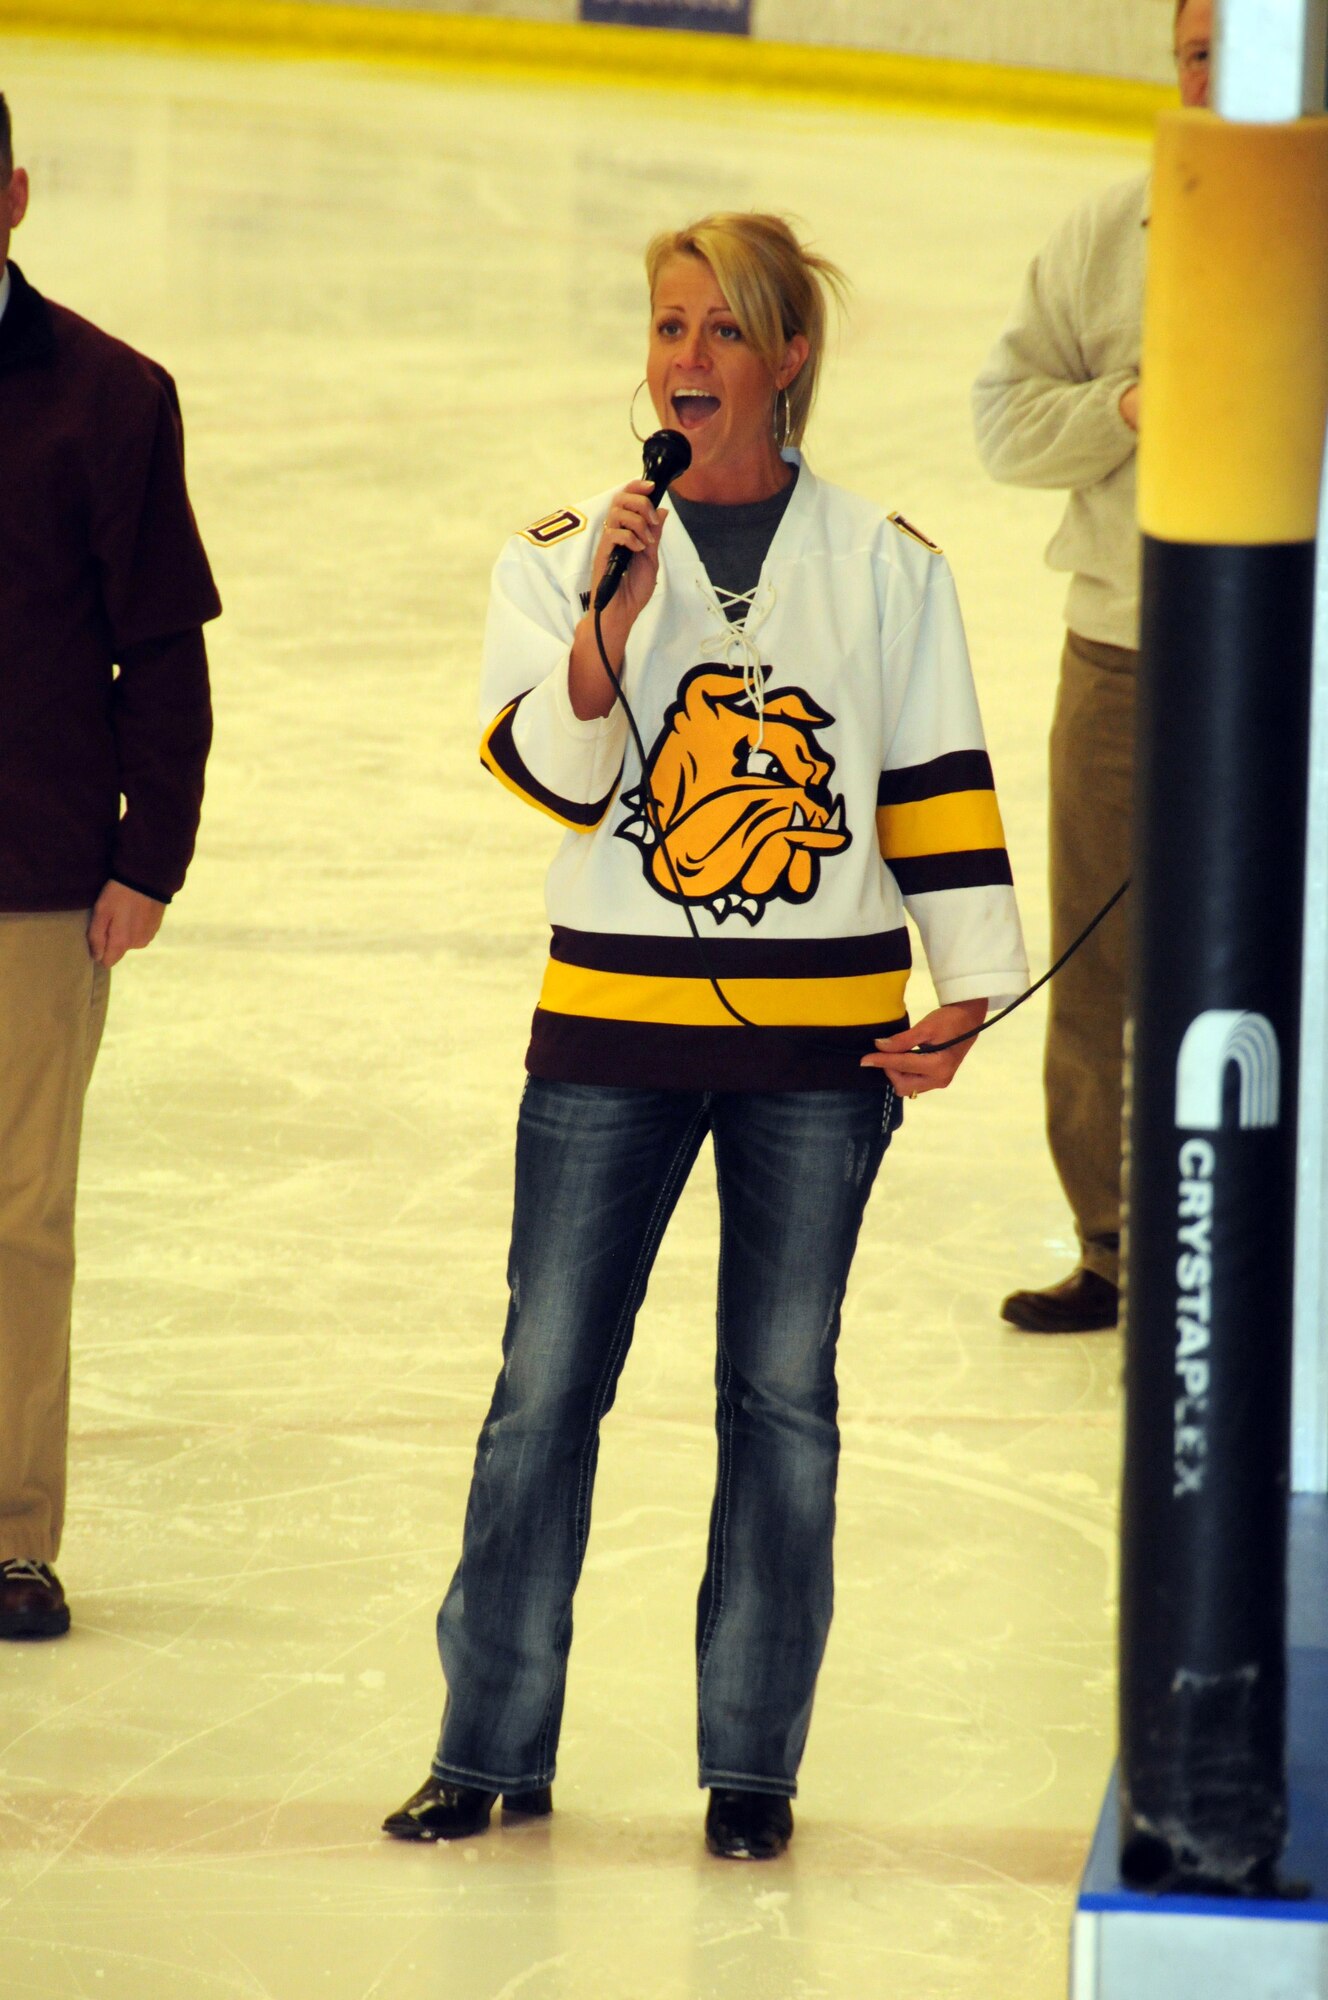 1st Lt. Jodi Kiminski of the 148th Fighter Wing, Duluth, Minn. sings the National Anthem before the start of the 2011 Minnesota National Guard Hockey Tournament.  The tournament was held at the Duluth Heritage Sports Center in Duluth, Minn.  (U.S. Air Force photo by Master Sgt. Ralph J. Kapustka)